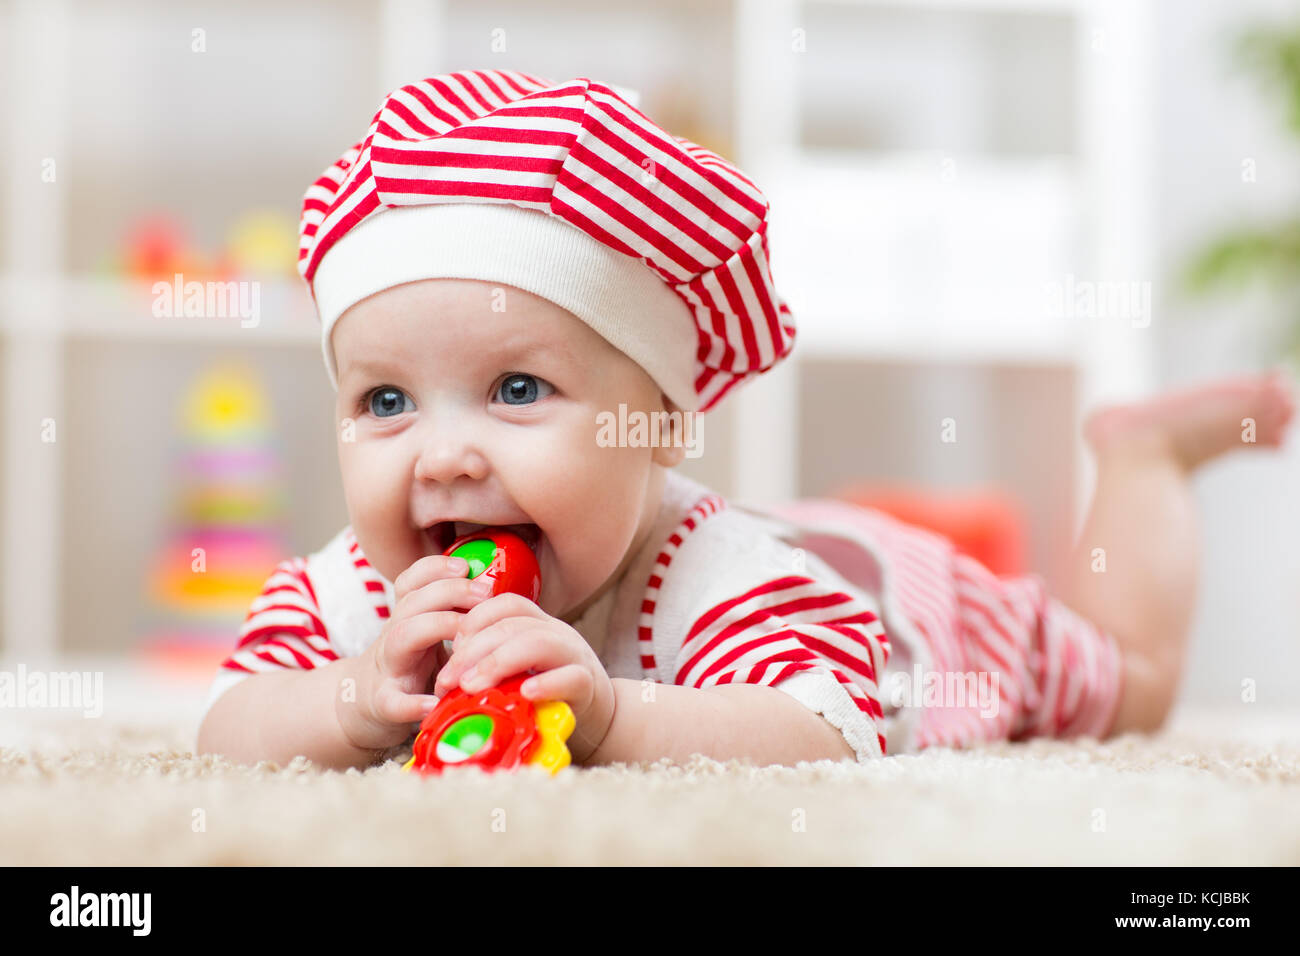 Child girl biting a toy lying on a carpet at home Stock Photo